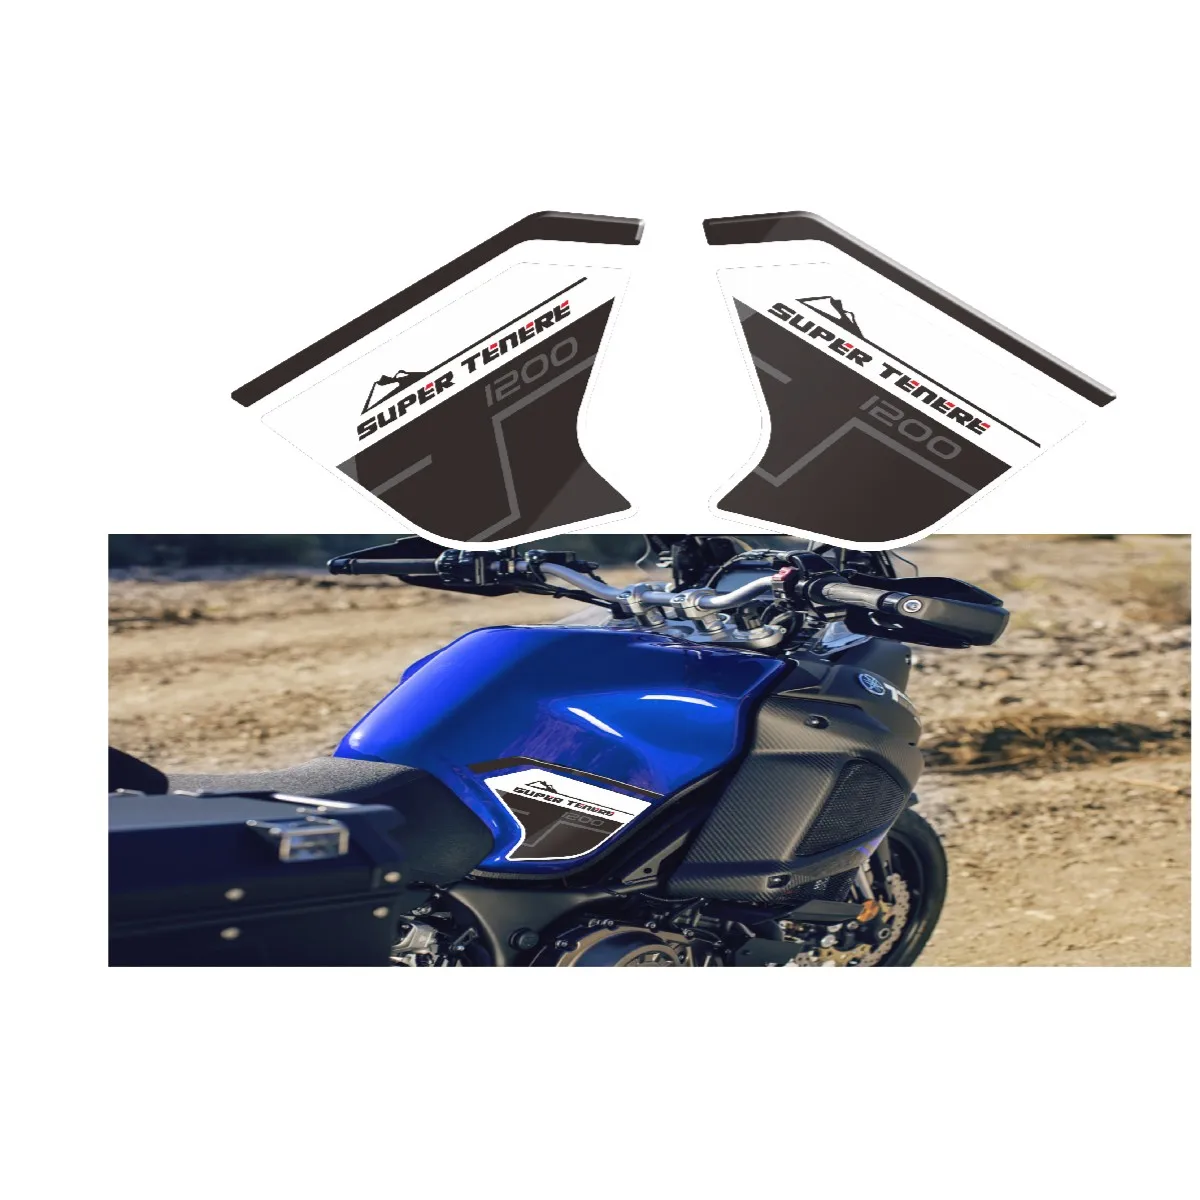 3D Stickers Decals Tank Pad For Yamaha Super Tenere XT1200X XT1200ZE XT 1200 Z ZE ES XTZ XTZ1200E Gas Fuel Oil Kit Knee Fish